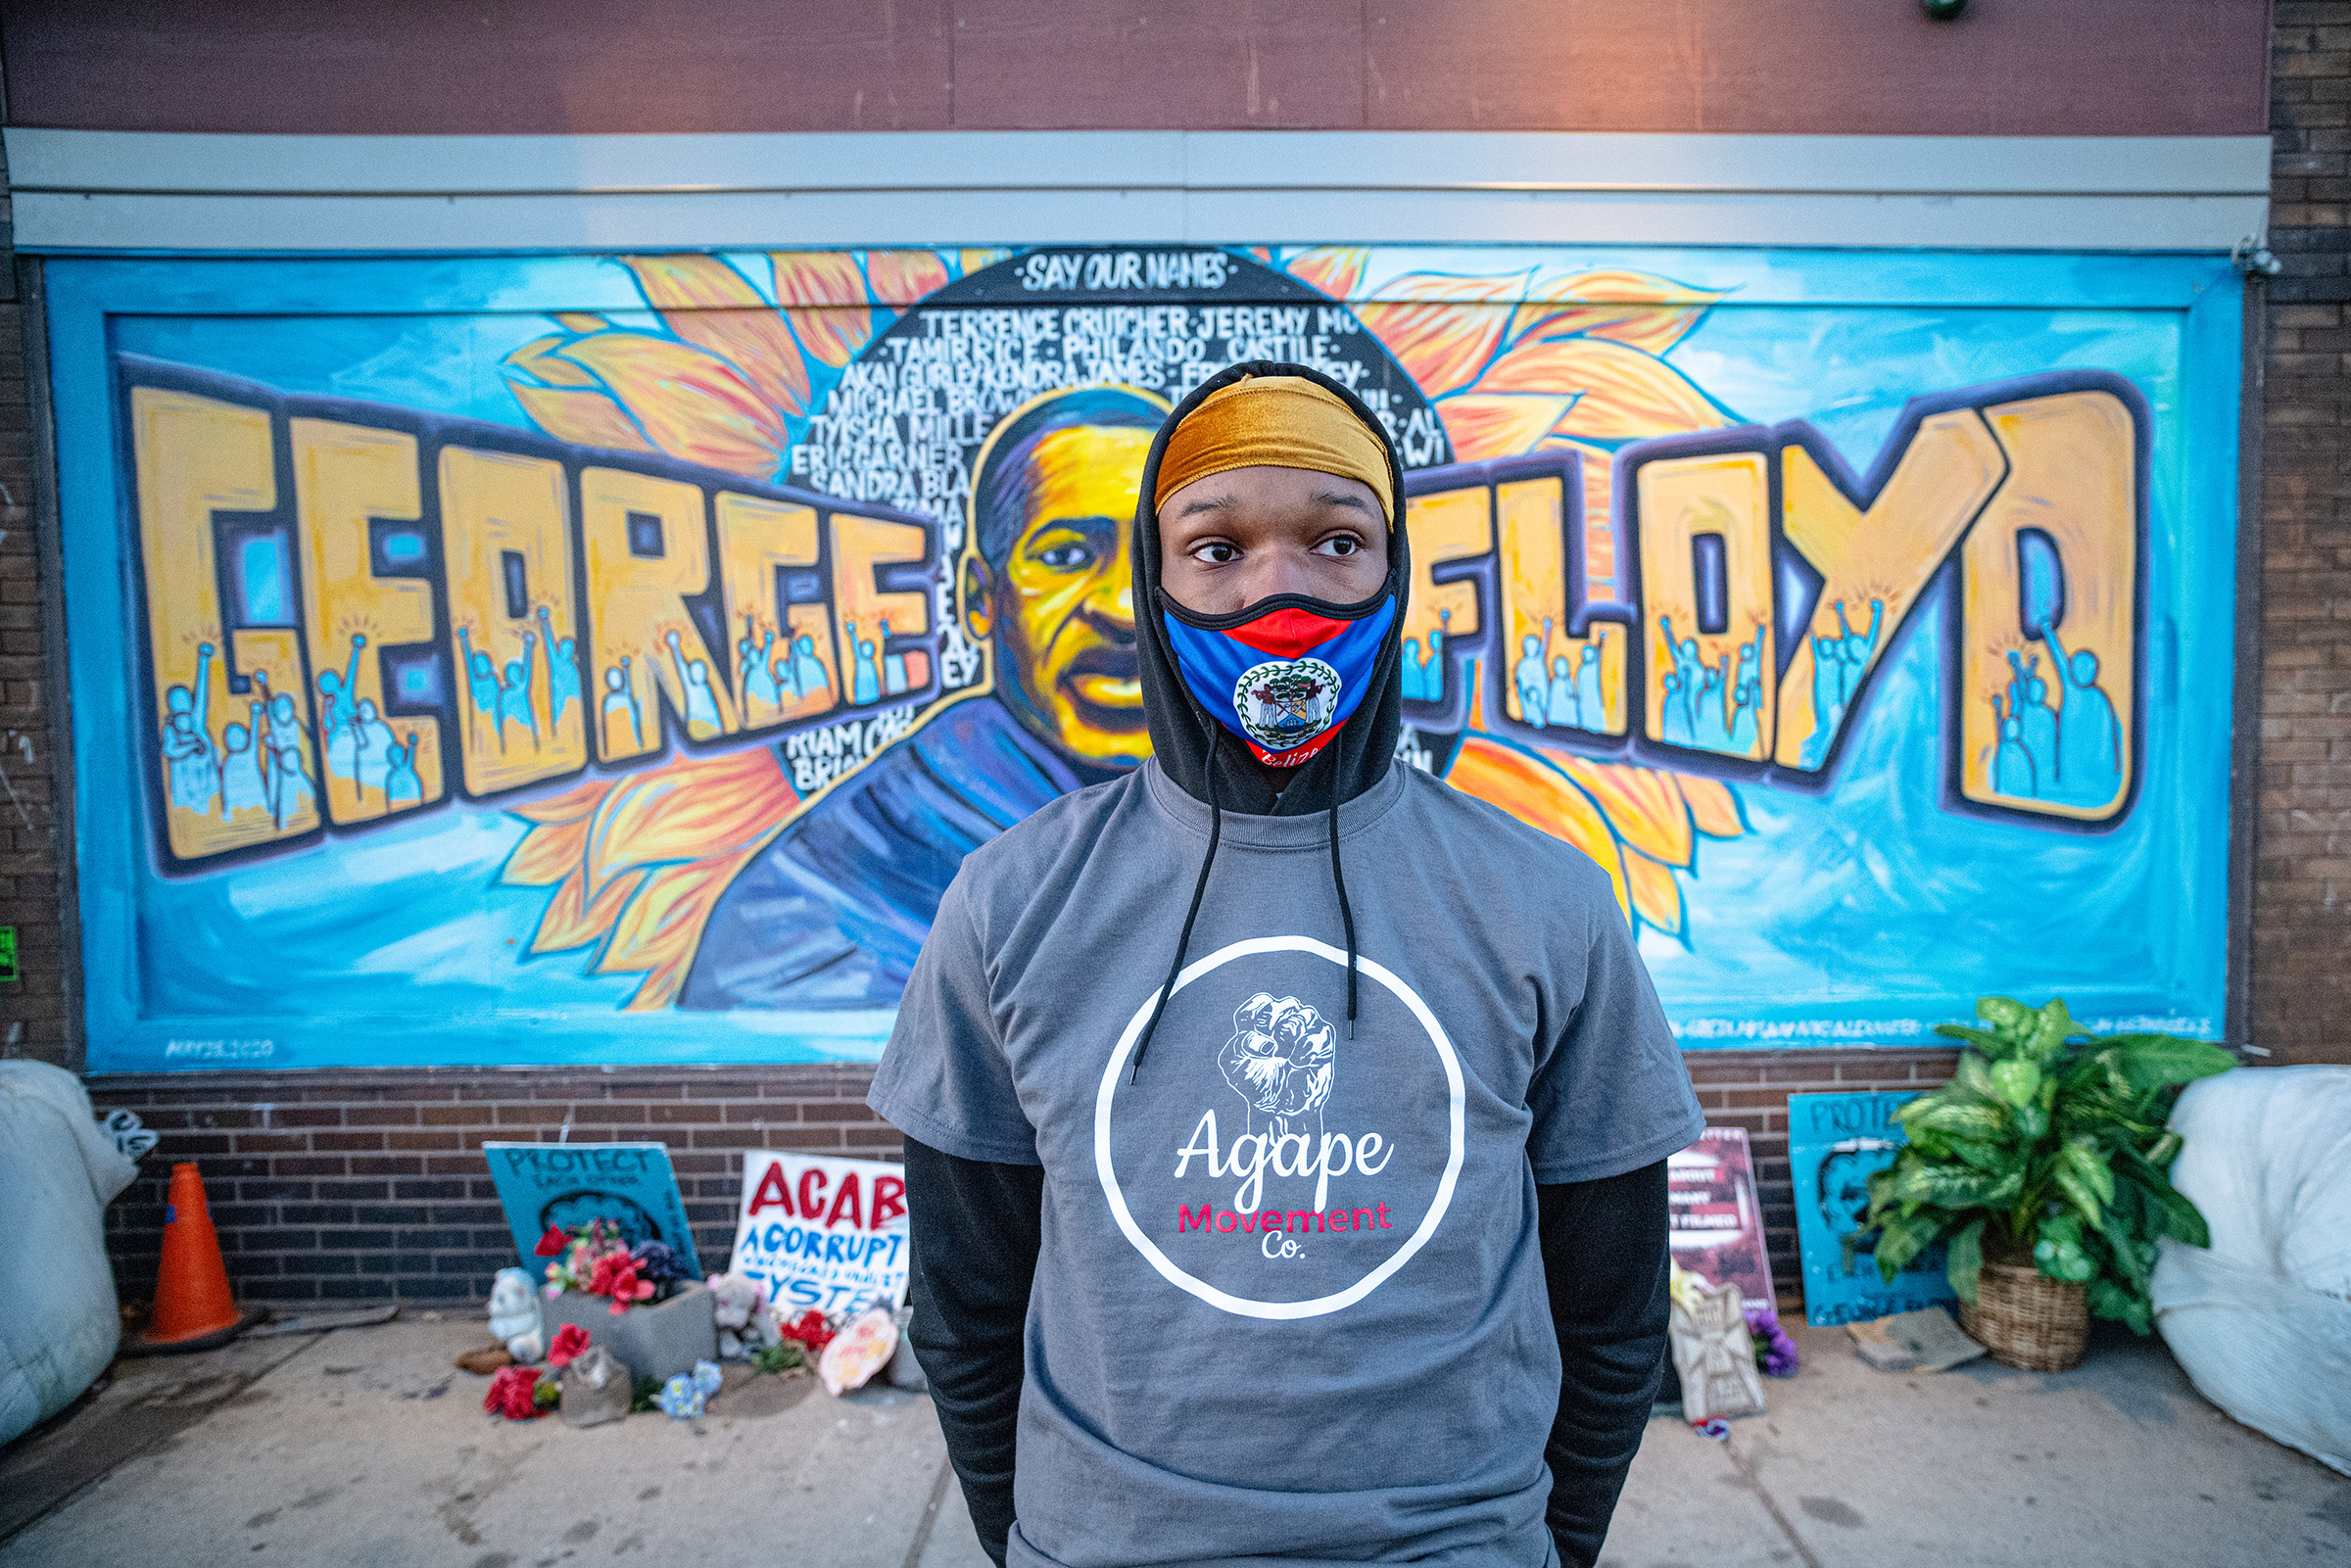 Ljhvonn Waller, 16, stands in front of a mural of George Floyd painted on the east 38th street side of Cup Food, near the intersection where Floyd died and a memorial remains. Waller was preparing to join the members of Agape, a non profit organization of men who live in the community who are trying to prevent and disrupt violence in that Minneapolis area.